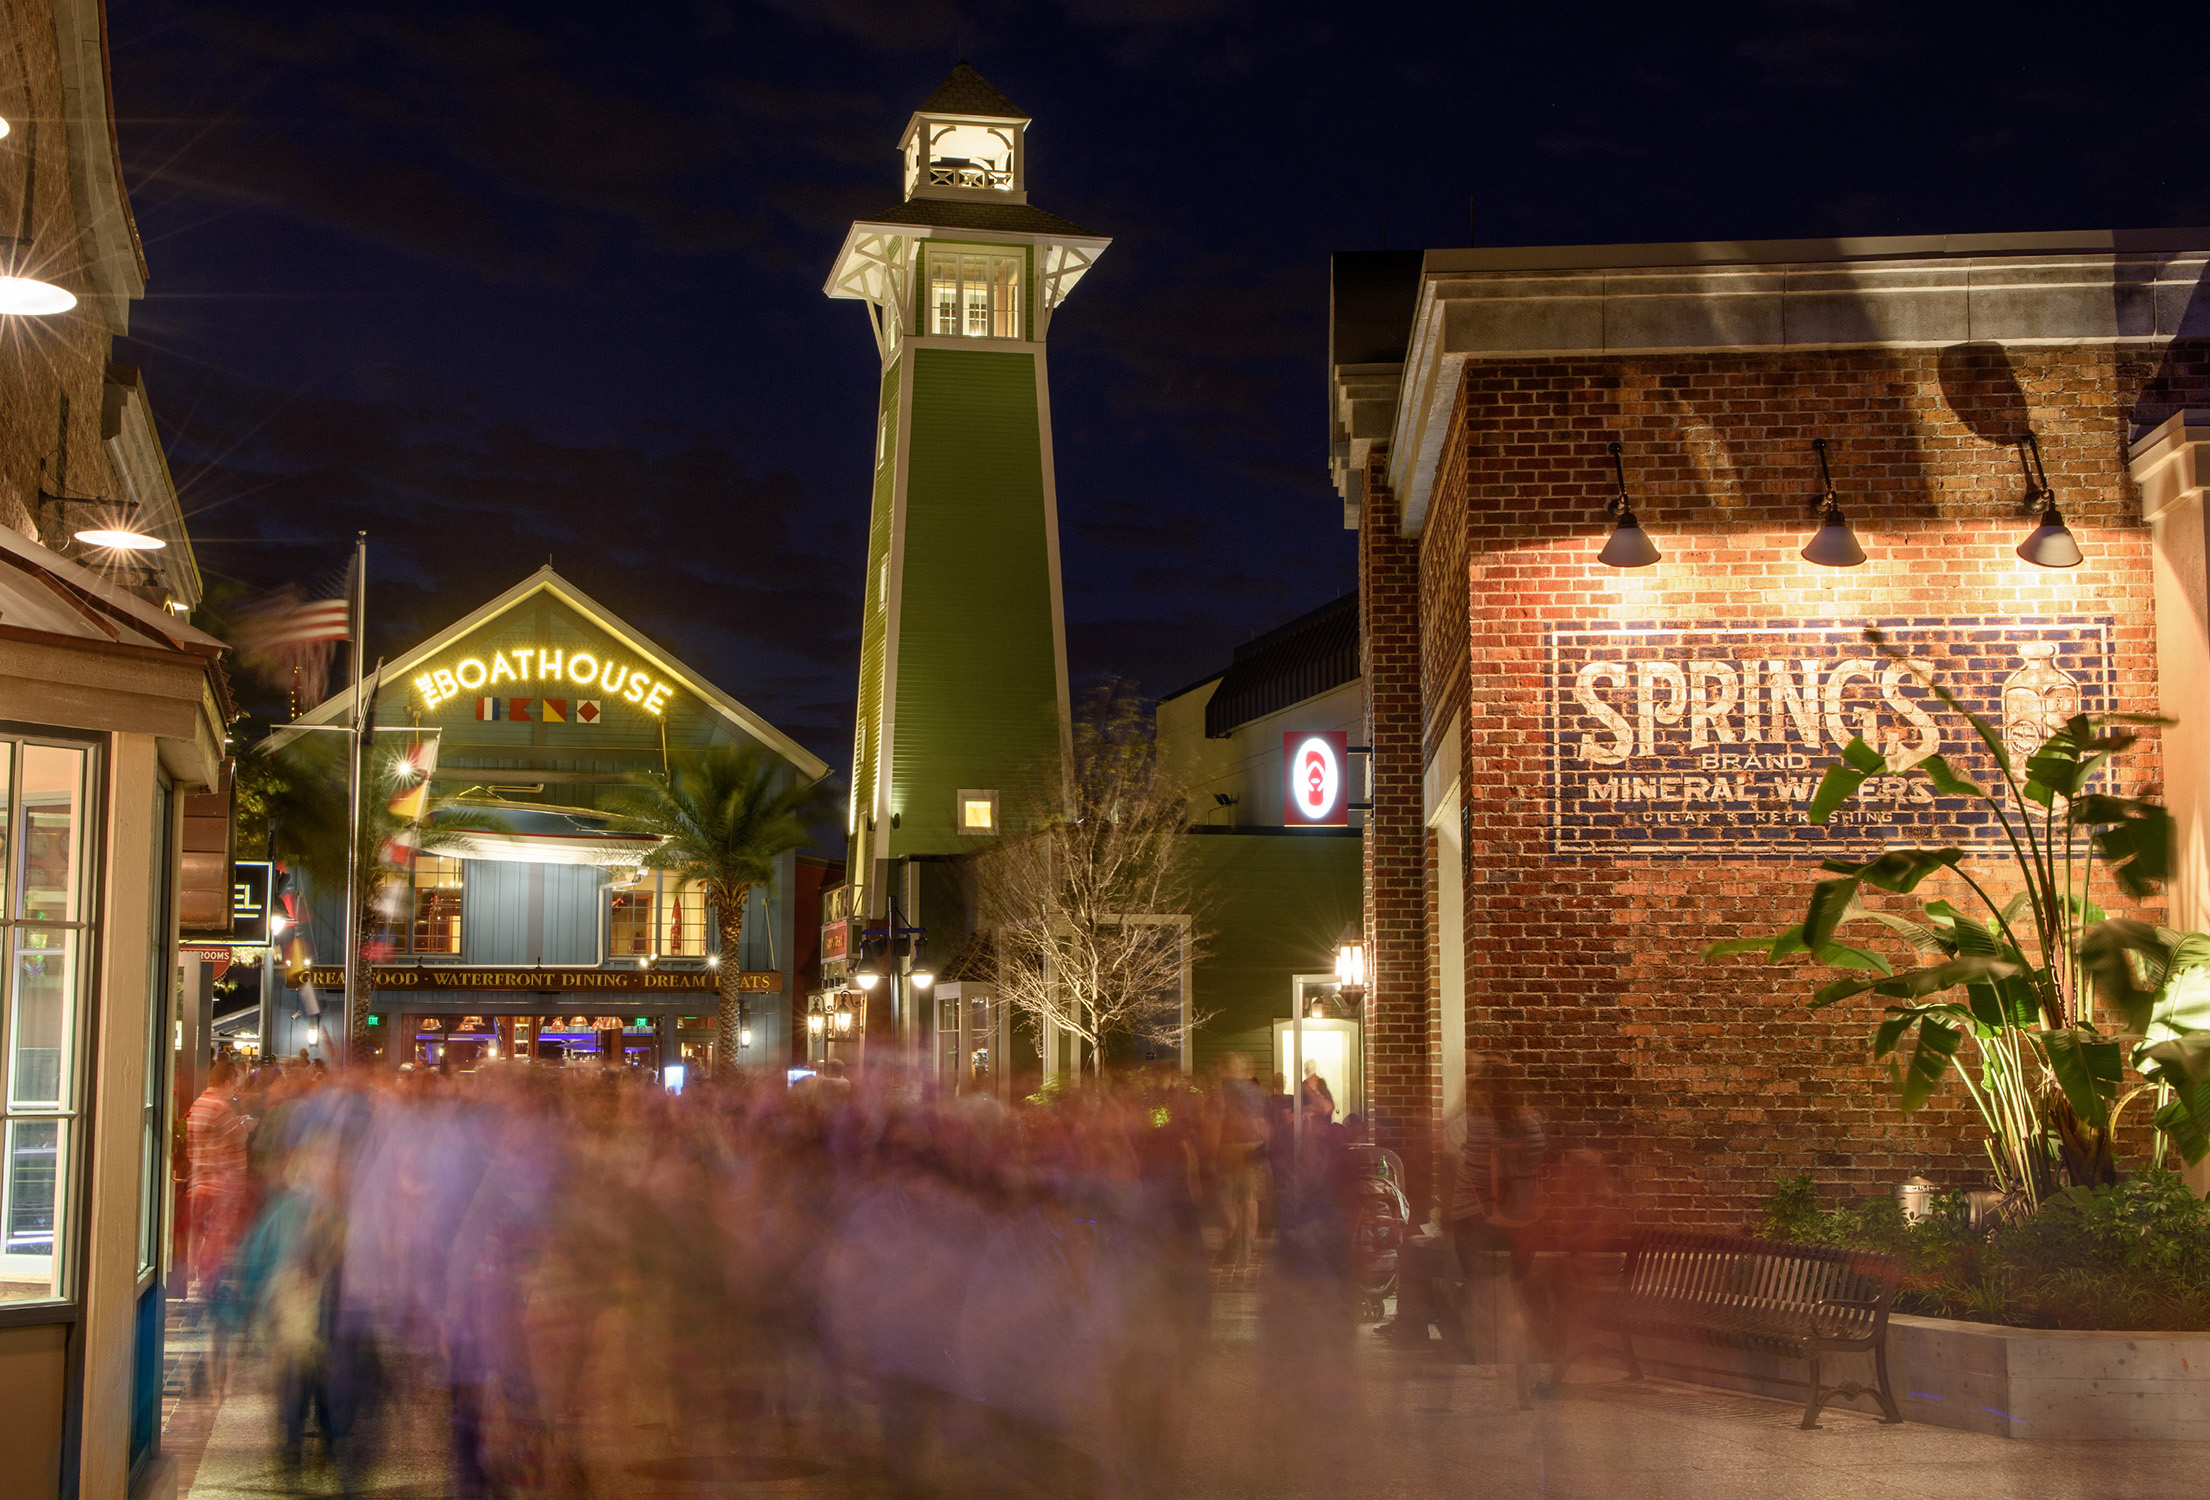 In transforming to Disney Springs downtown Disney brings new buying and dining